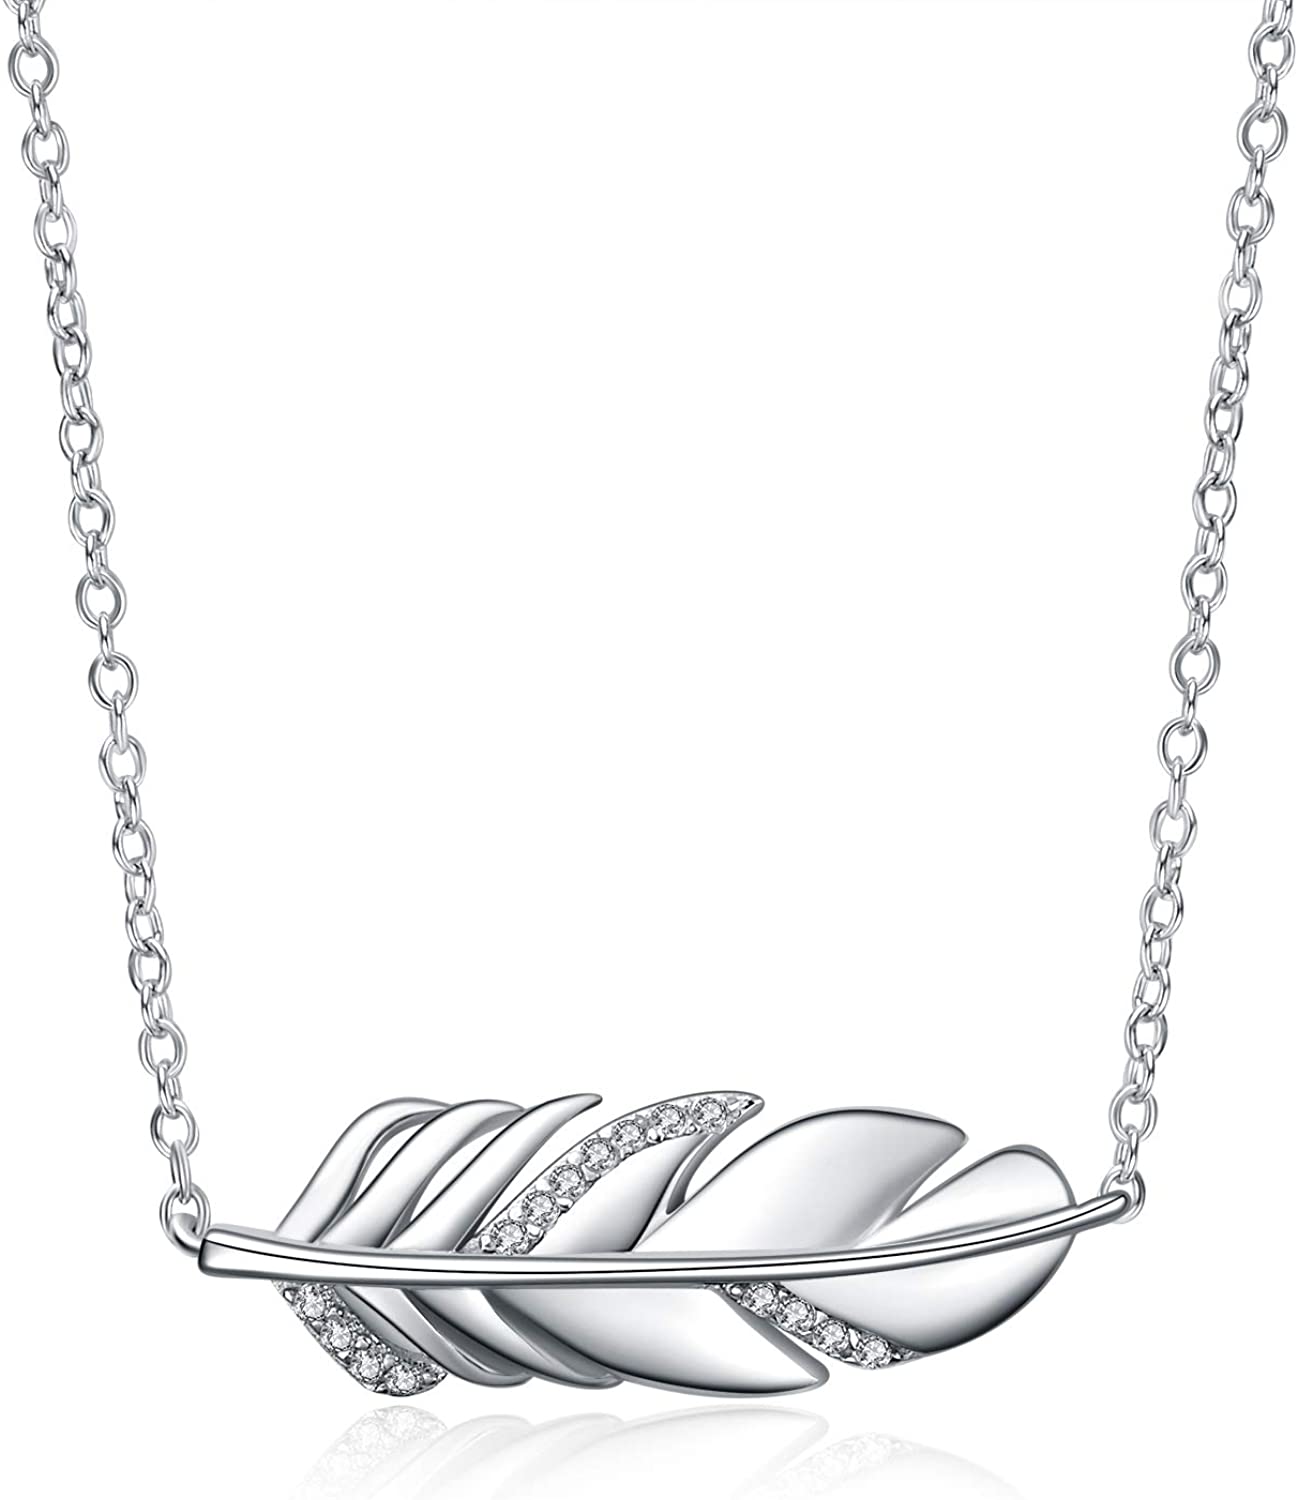 Feather choker necklace Sterling Silver Dainty Choker Pendant Necklace Jewelry Gifts for Women Girls